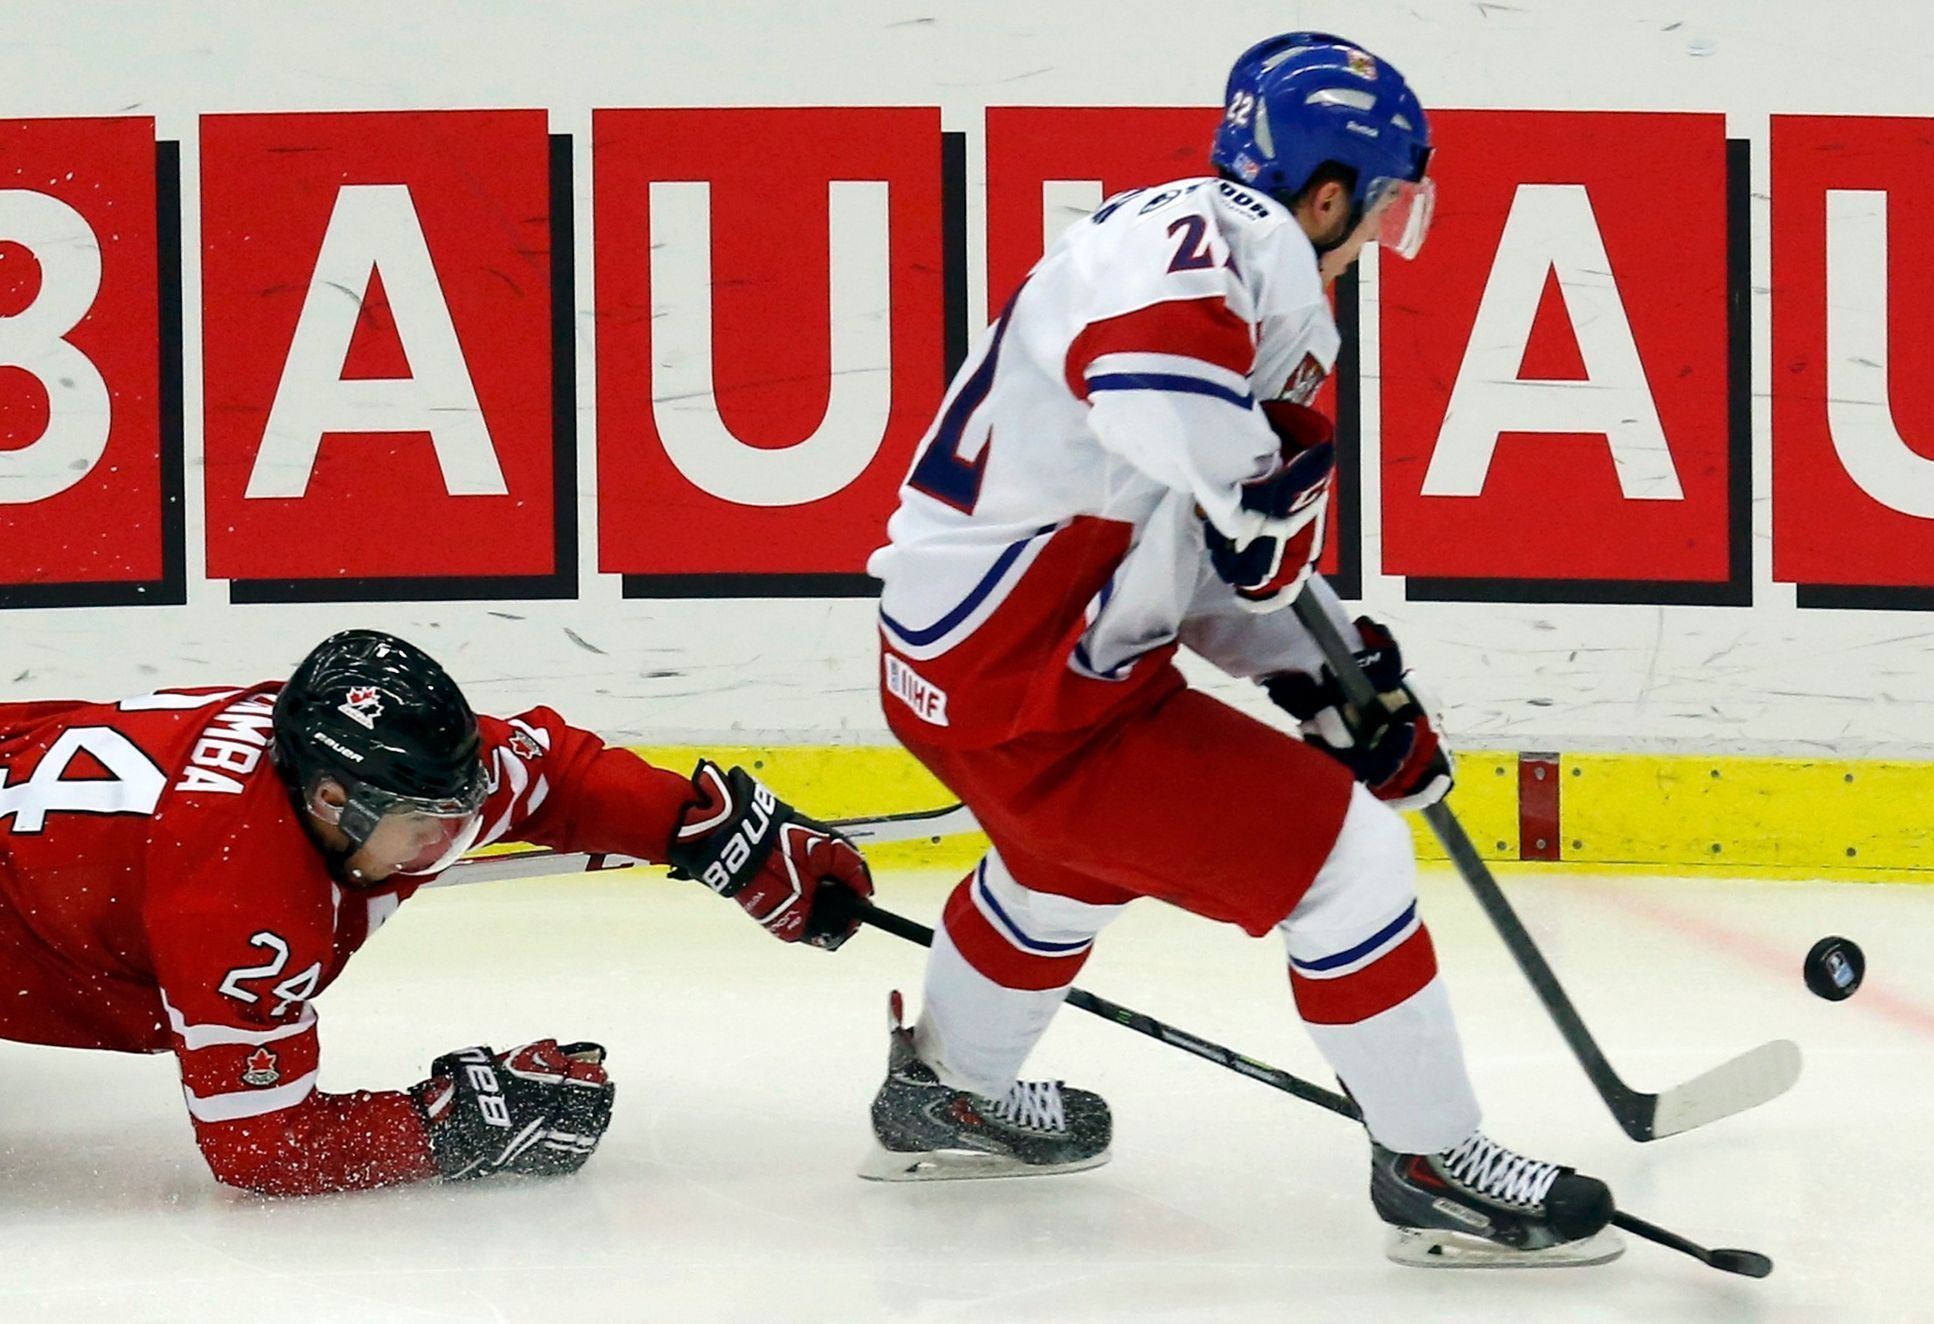 Canada's Dumba dives for the puck carried by Czech Republic's Simon during the second period of their IIHF World Junior Championship ice hockey game in Malmo